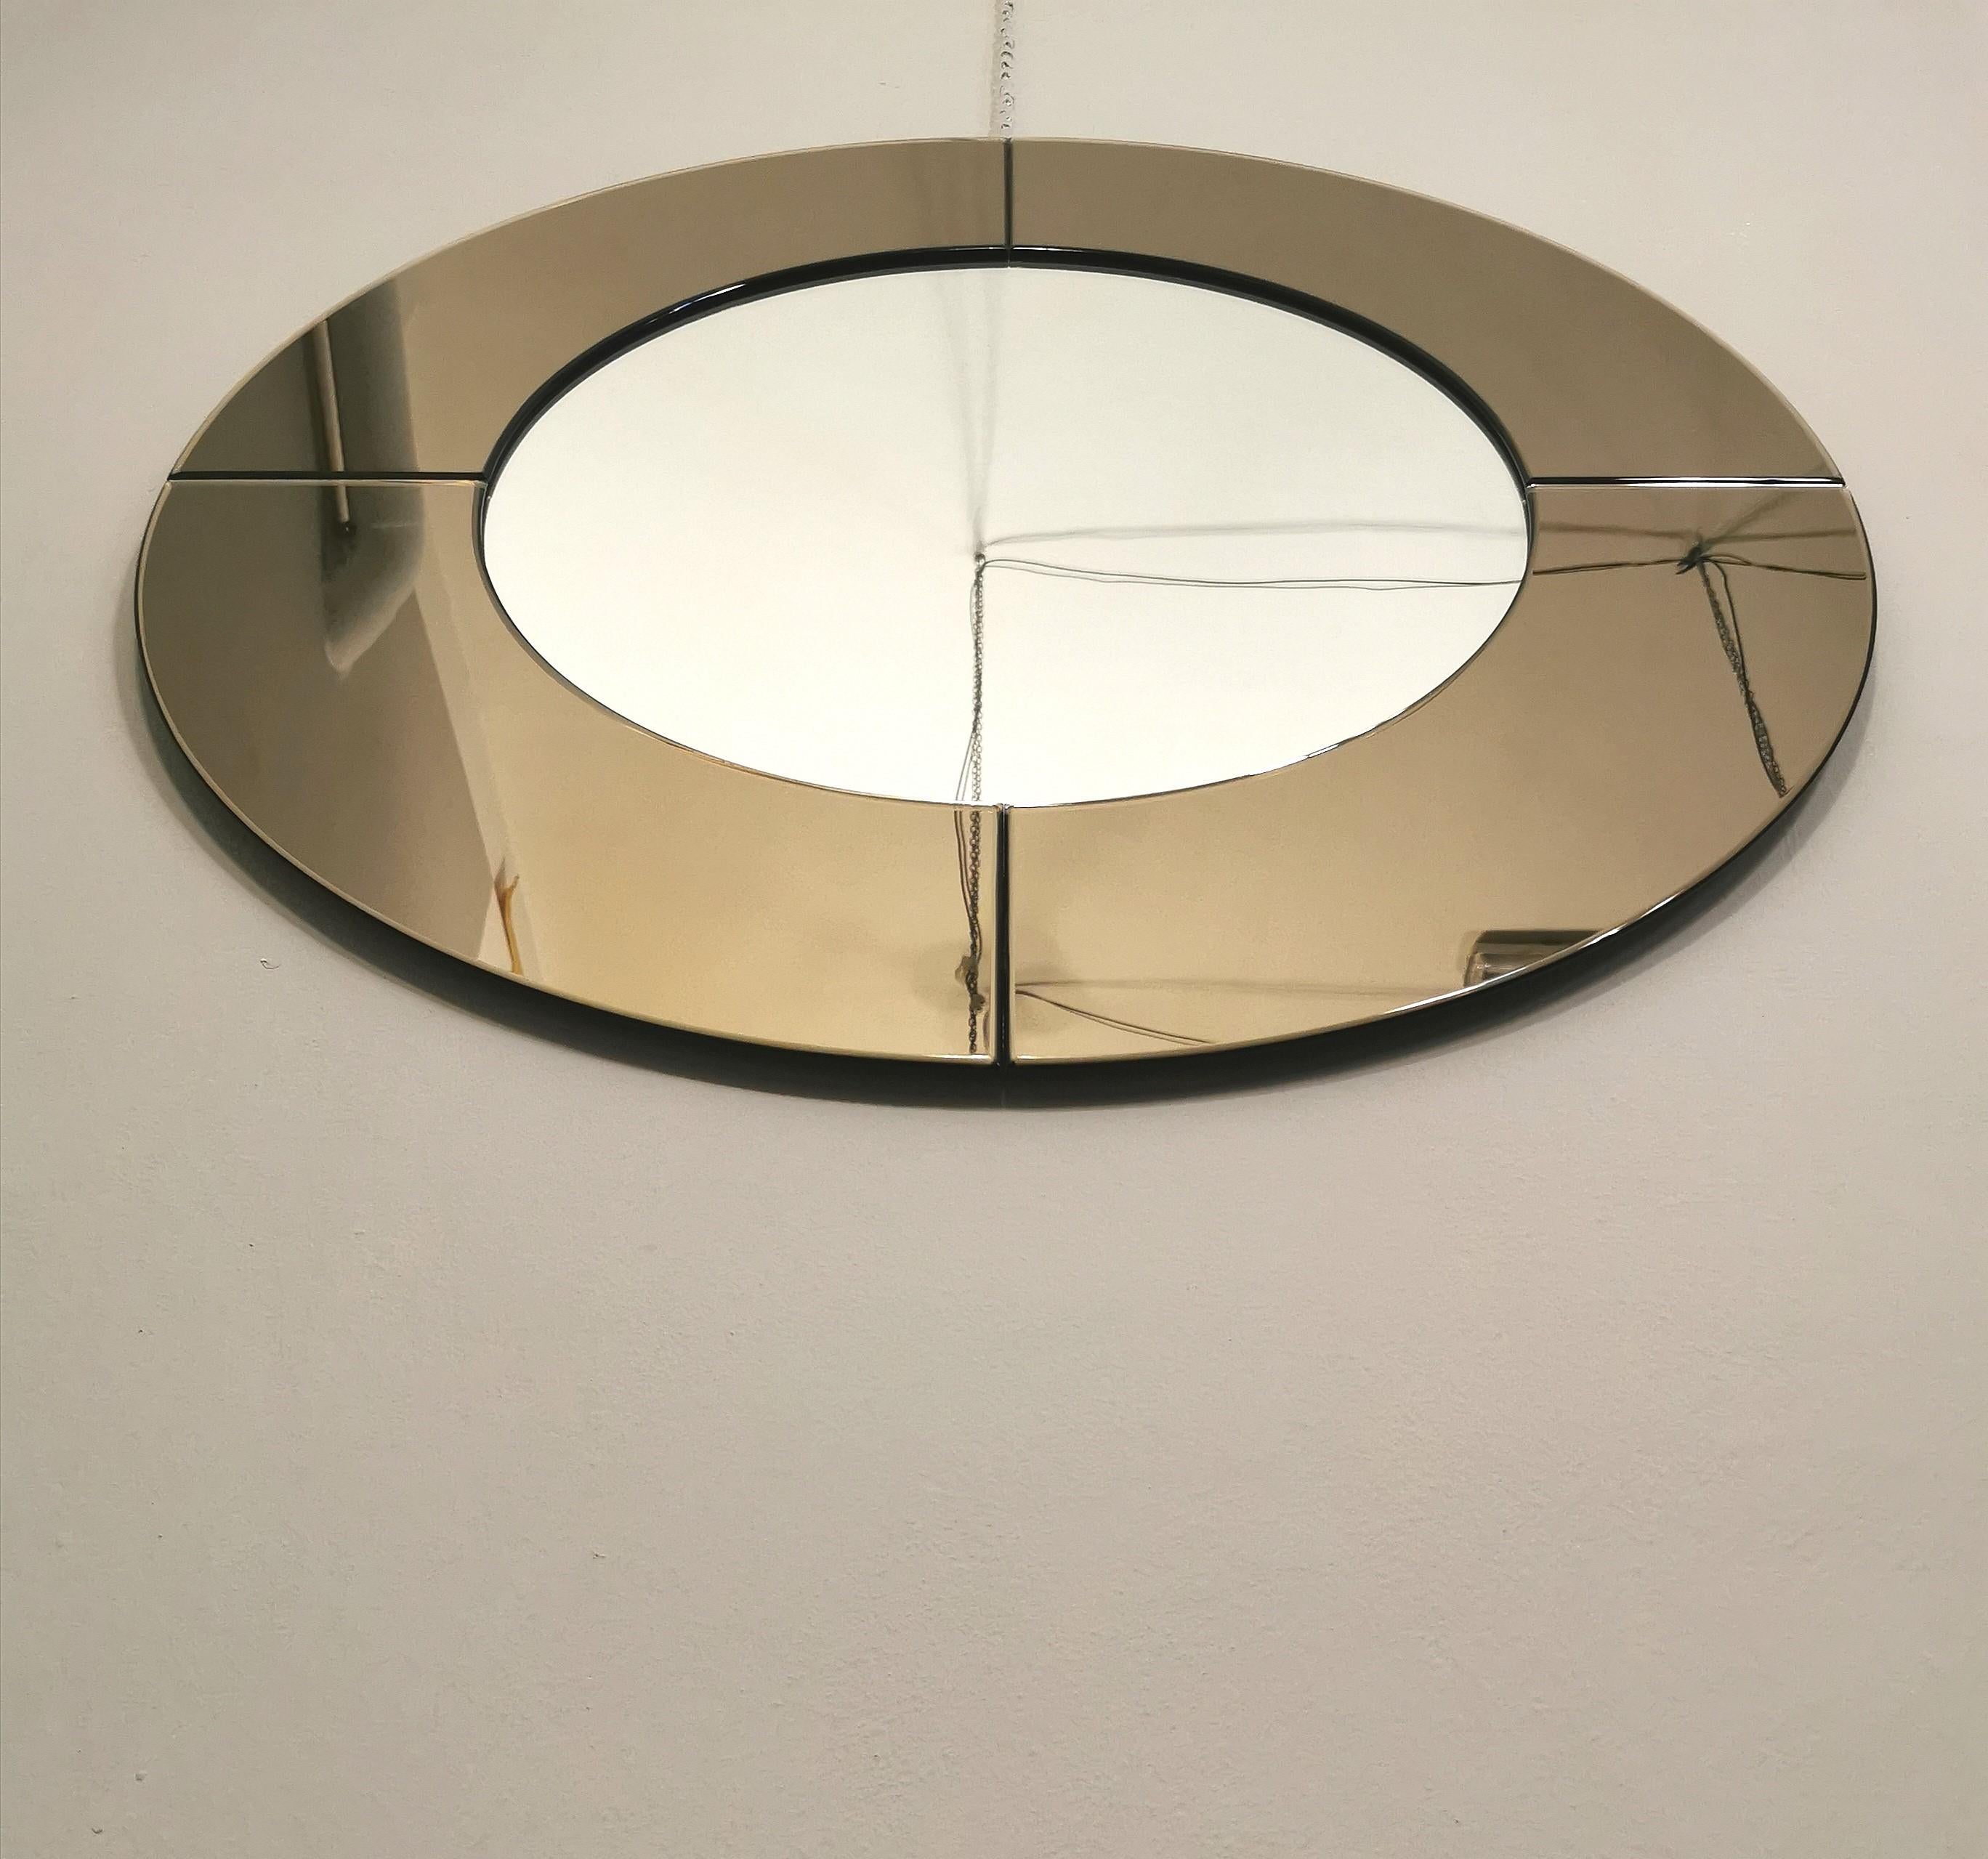 20th Century Midcentury Wall Mirror Mirrored Glass Smoked Round Large Italian Design 1970s For Sale